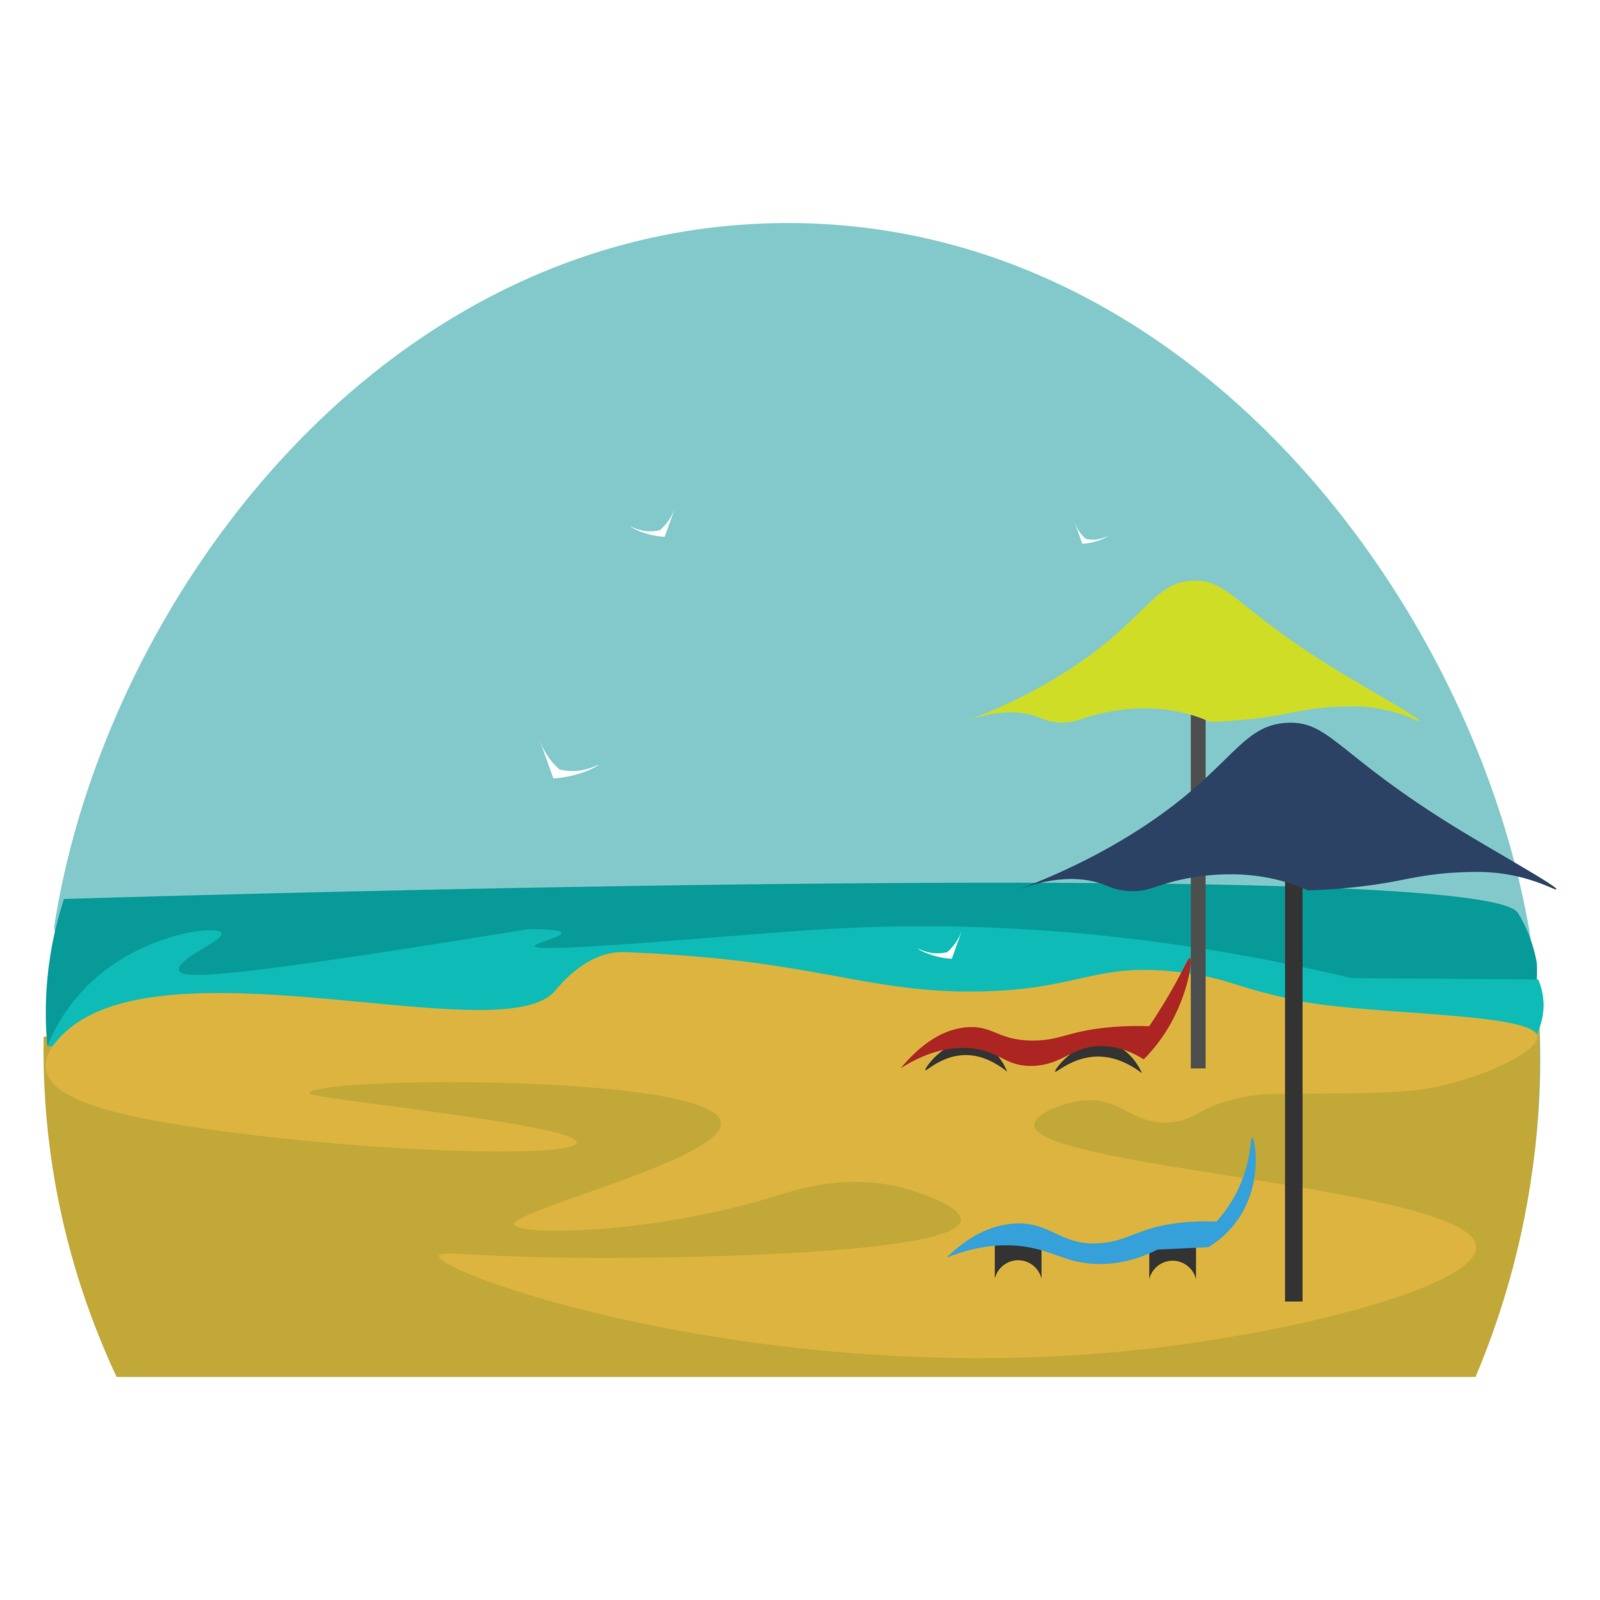 Comfortable deckchairs in red and blue color along the beachside vector color drawing or illustration